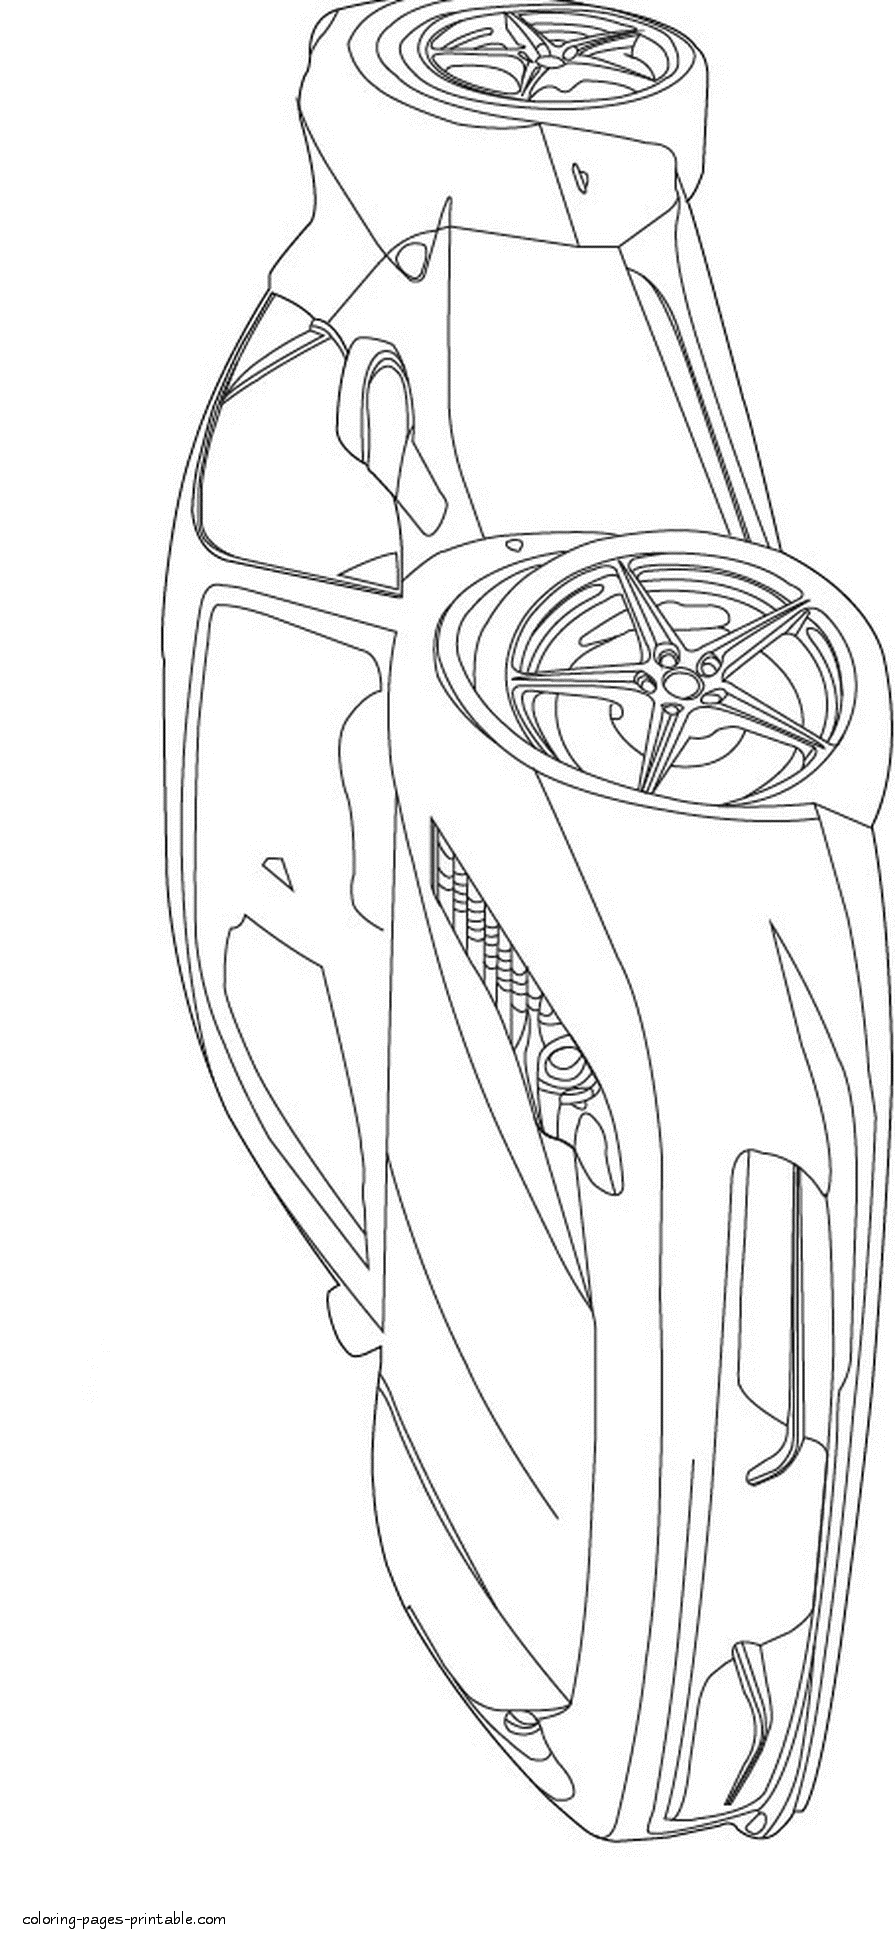 Ferrari coloring pages for free. The best sports car